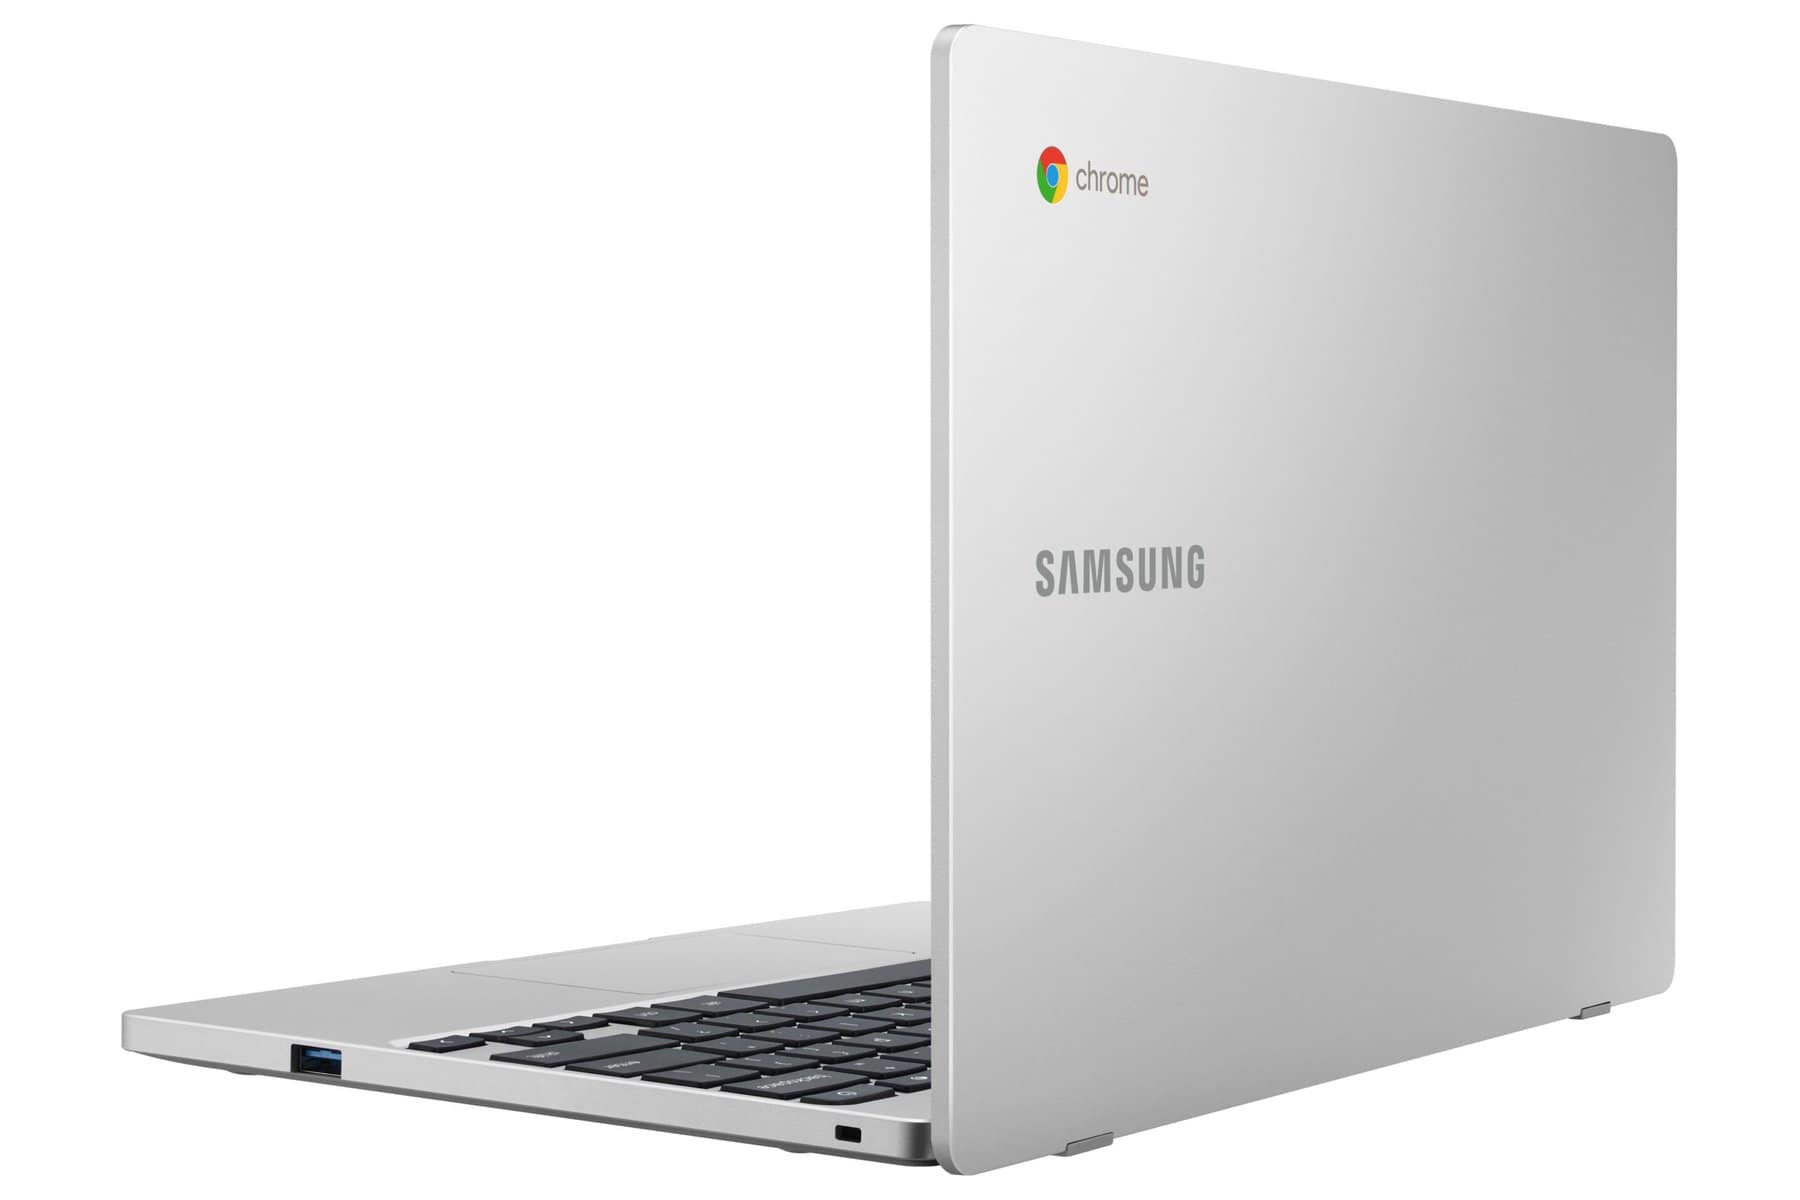 Introducing the Samsung Chromebook 4